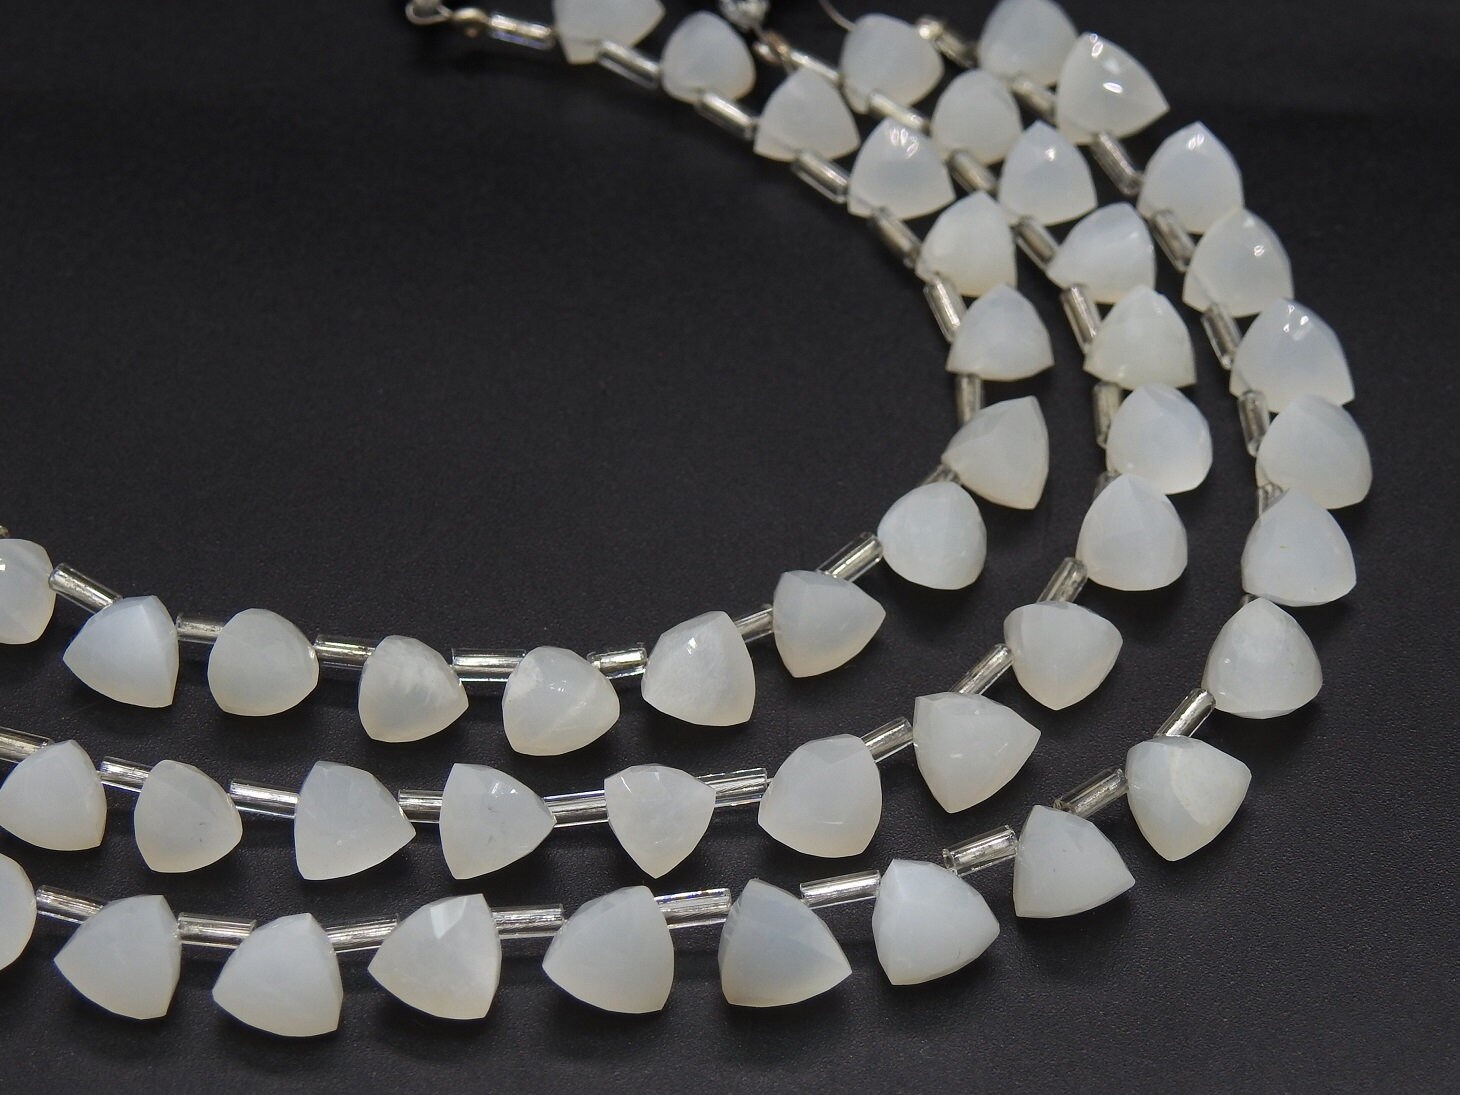 10Piece Strand,Natural White Moonstone Micro Faceted Trillions,Triangle,Drop,Briolettes,Wholesaler,Supplies 7X7MM Approx PME-BR2 | Save 33% - Rajasthan Living 13